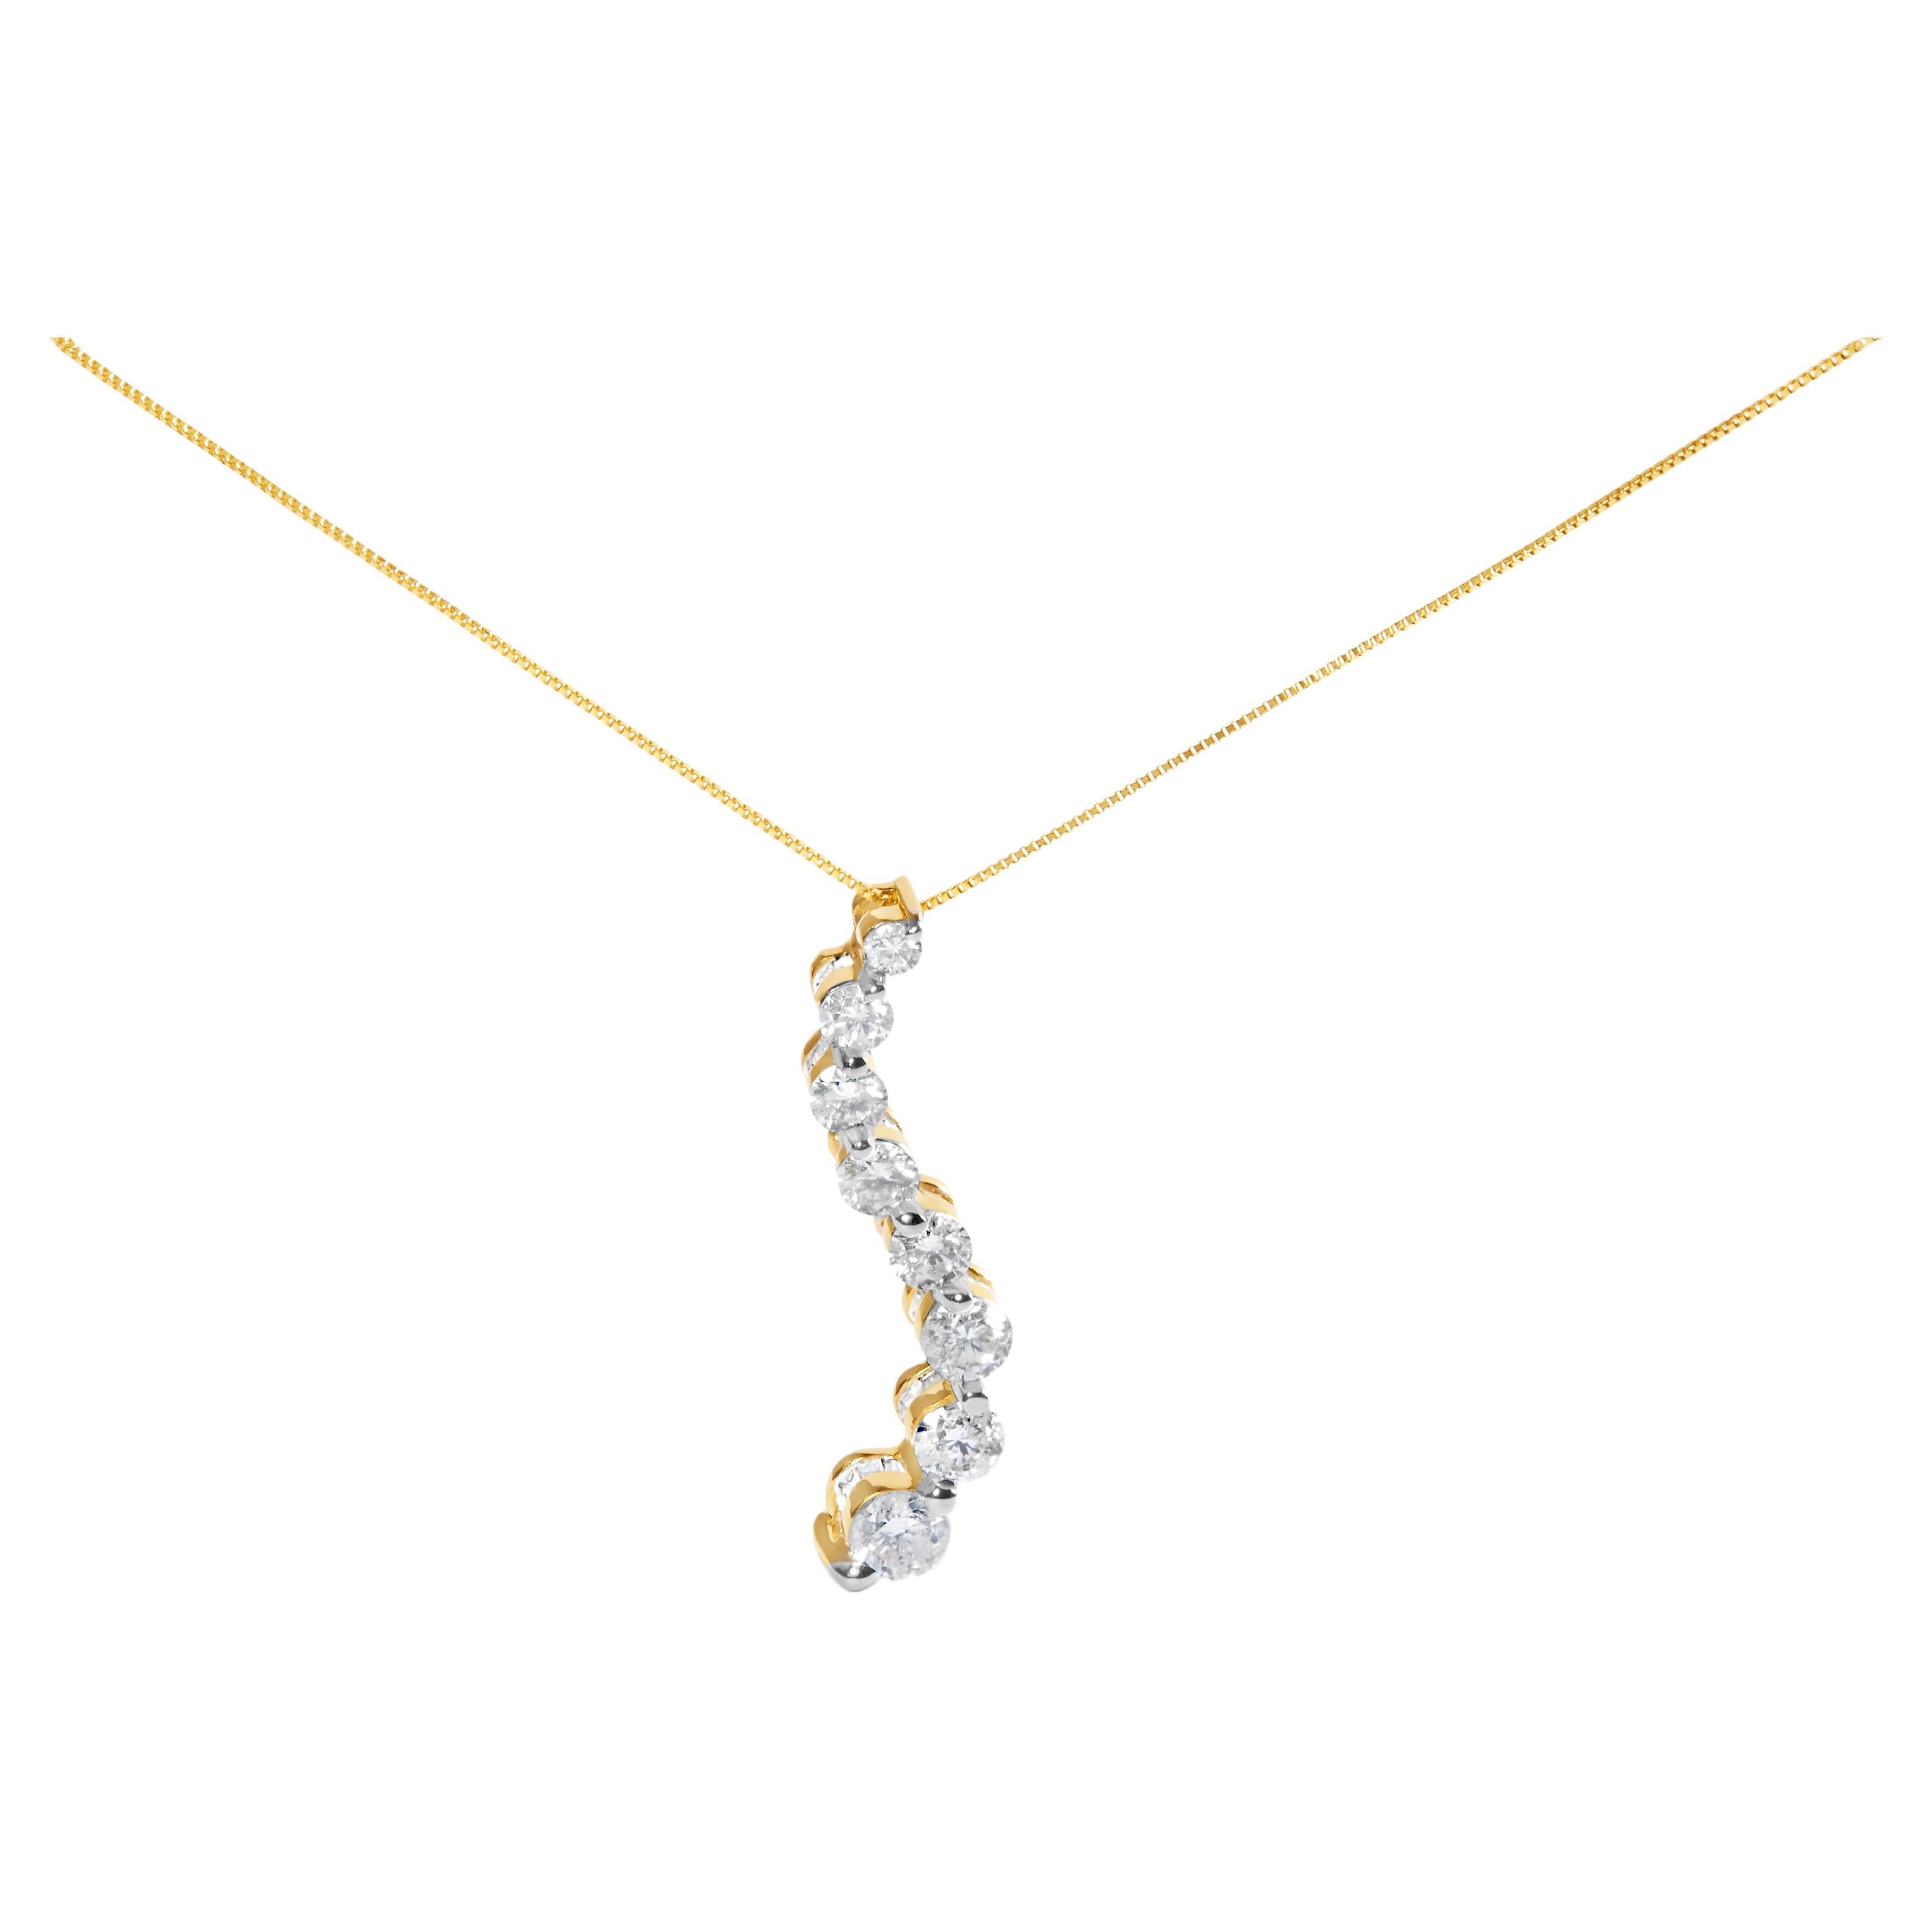 AGS Certified 14K Yellow Gold 3.0 Carat Diamond Journey Pendant Necklace For Sale